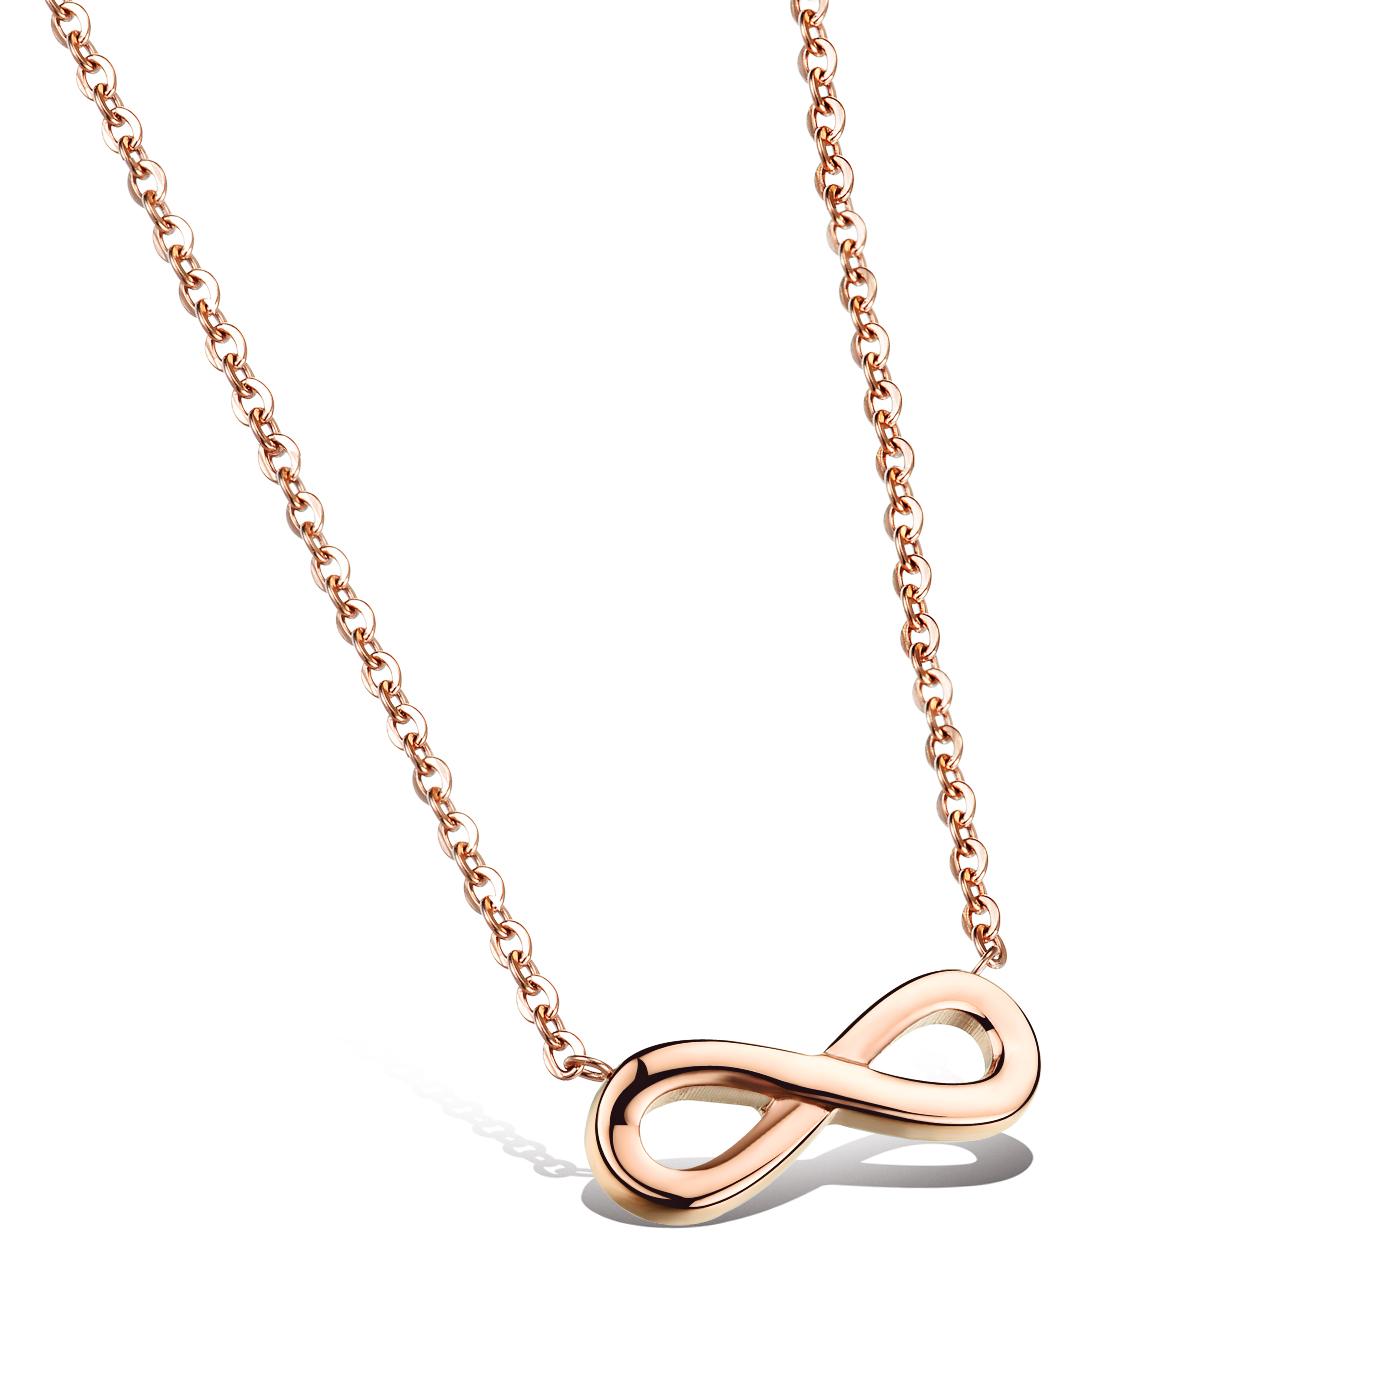 necklaces for women cheap rose gold necklace wholesale gold necklace for women swarovski VGLKBNM